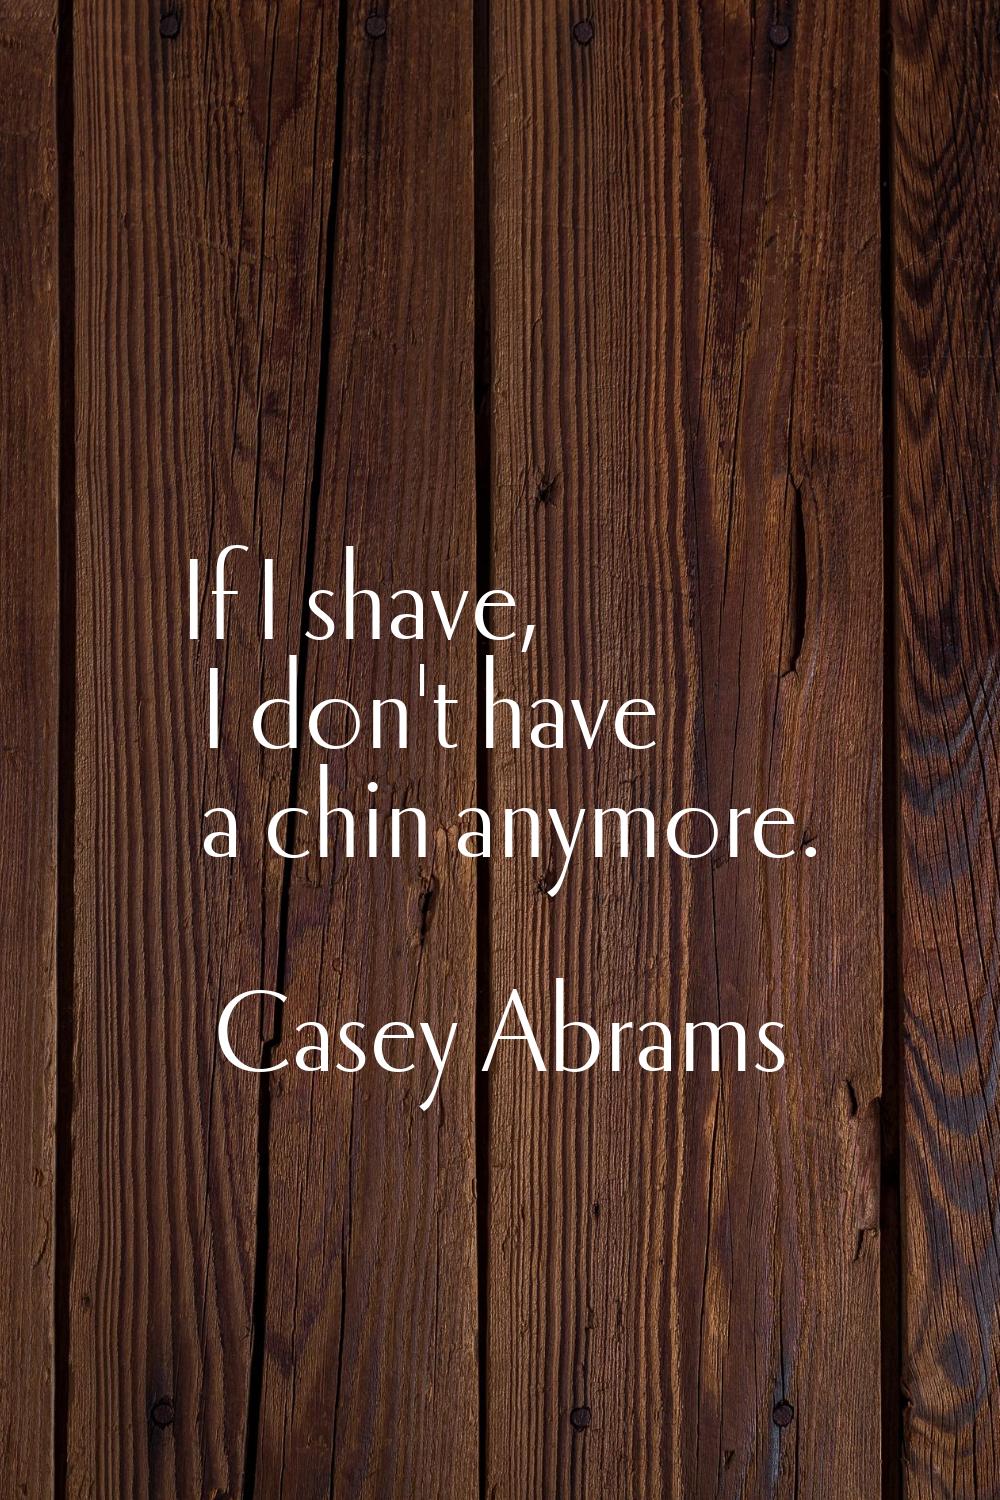 If I shave, I don't have a chin anymore.